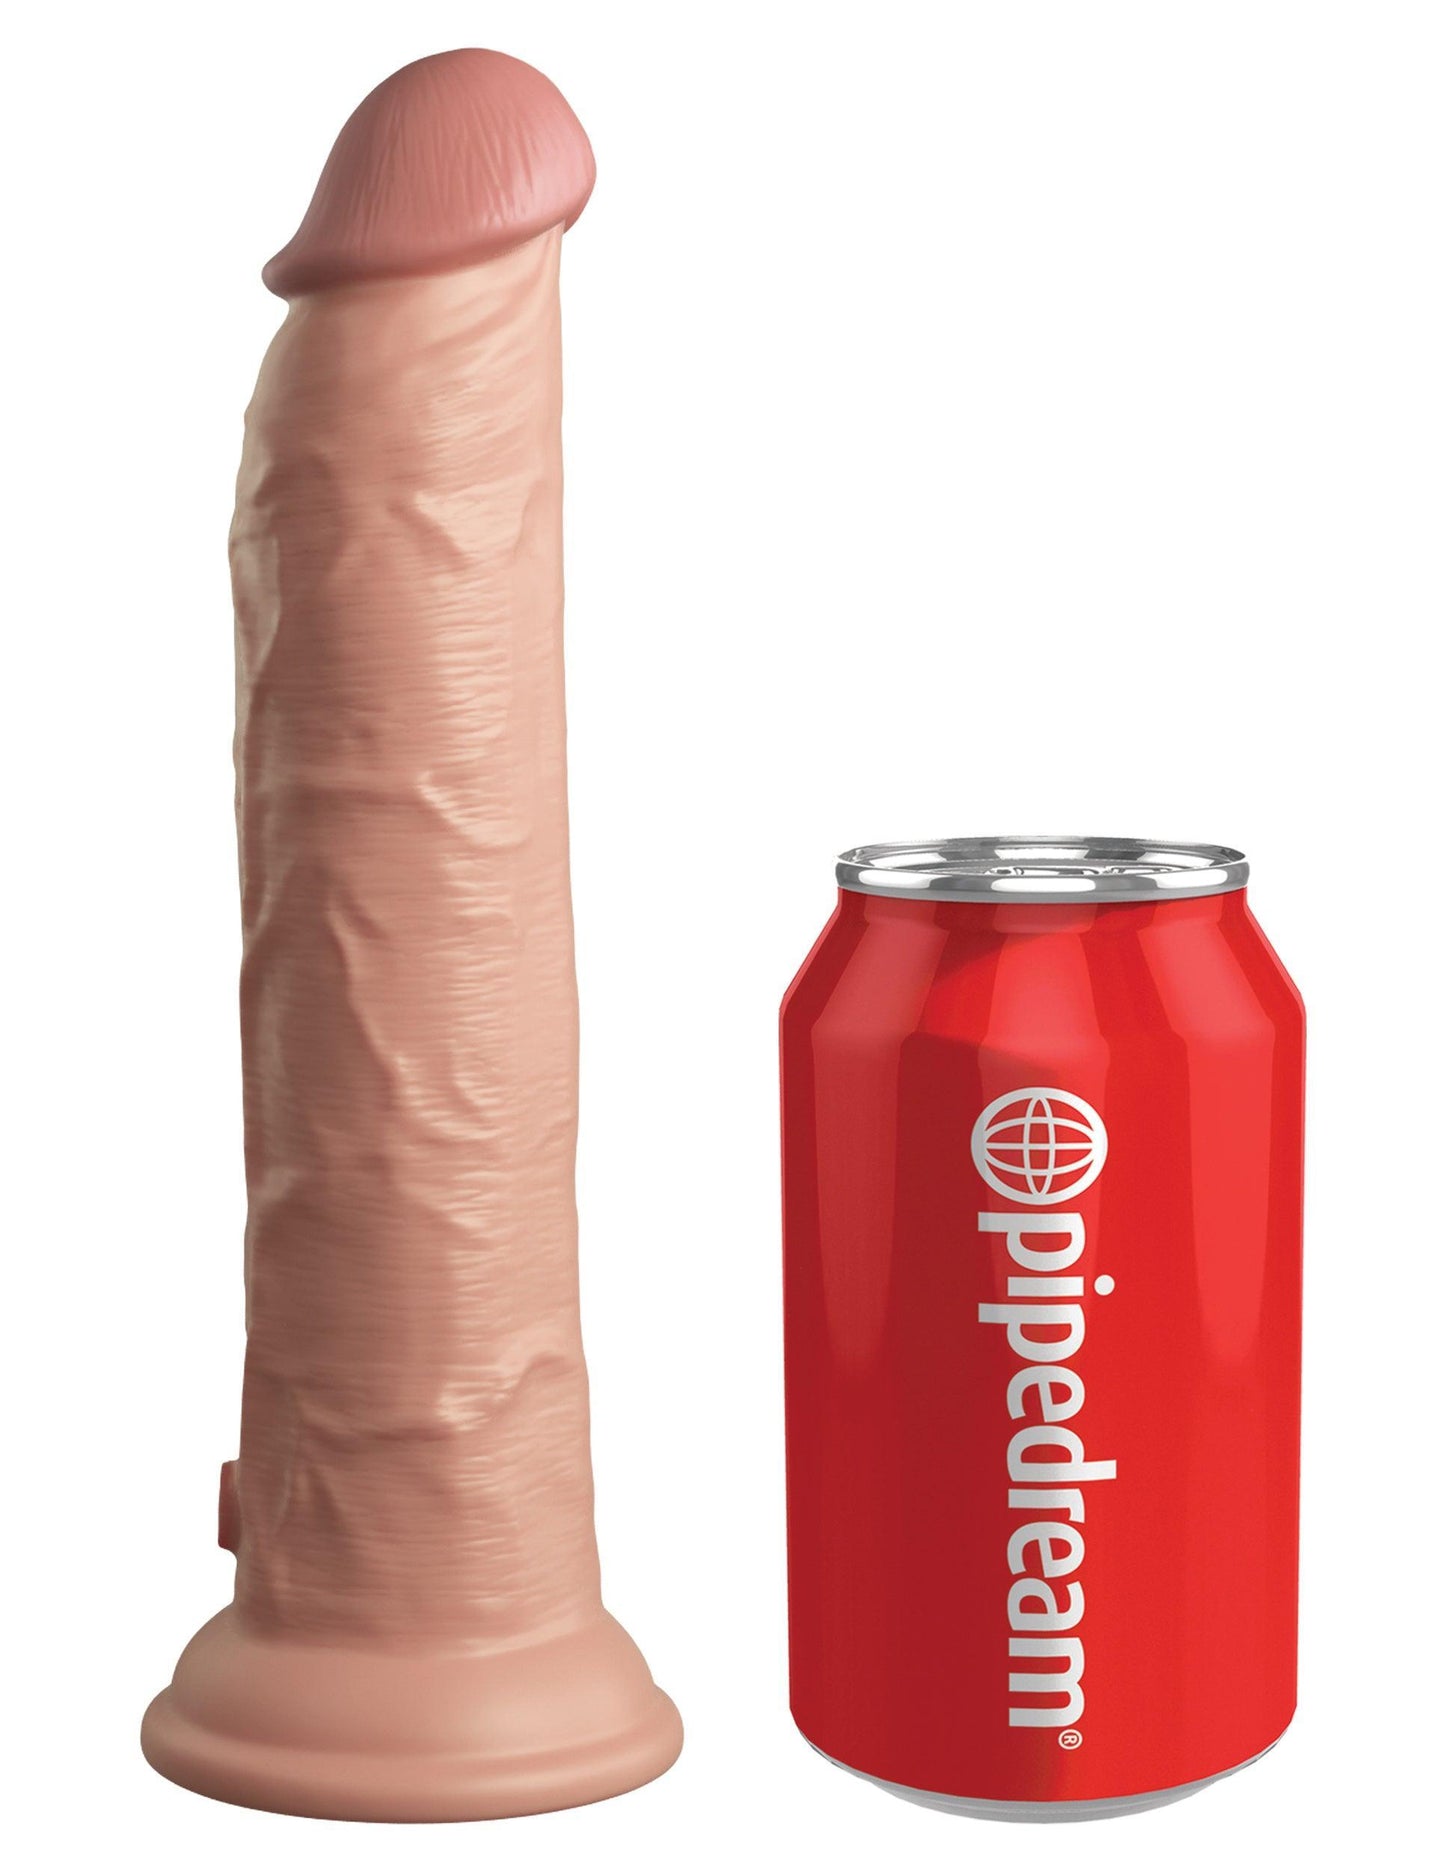 King Cock Elite 9 Inch Vibrating Silicone Dual Density Cock With Remote - Light - My Sex Toy Hub